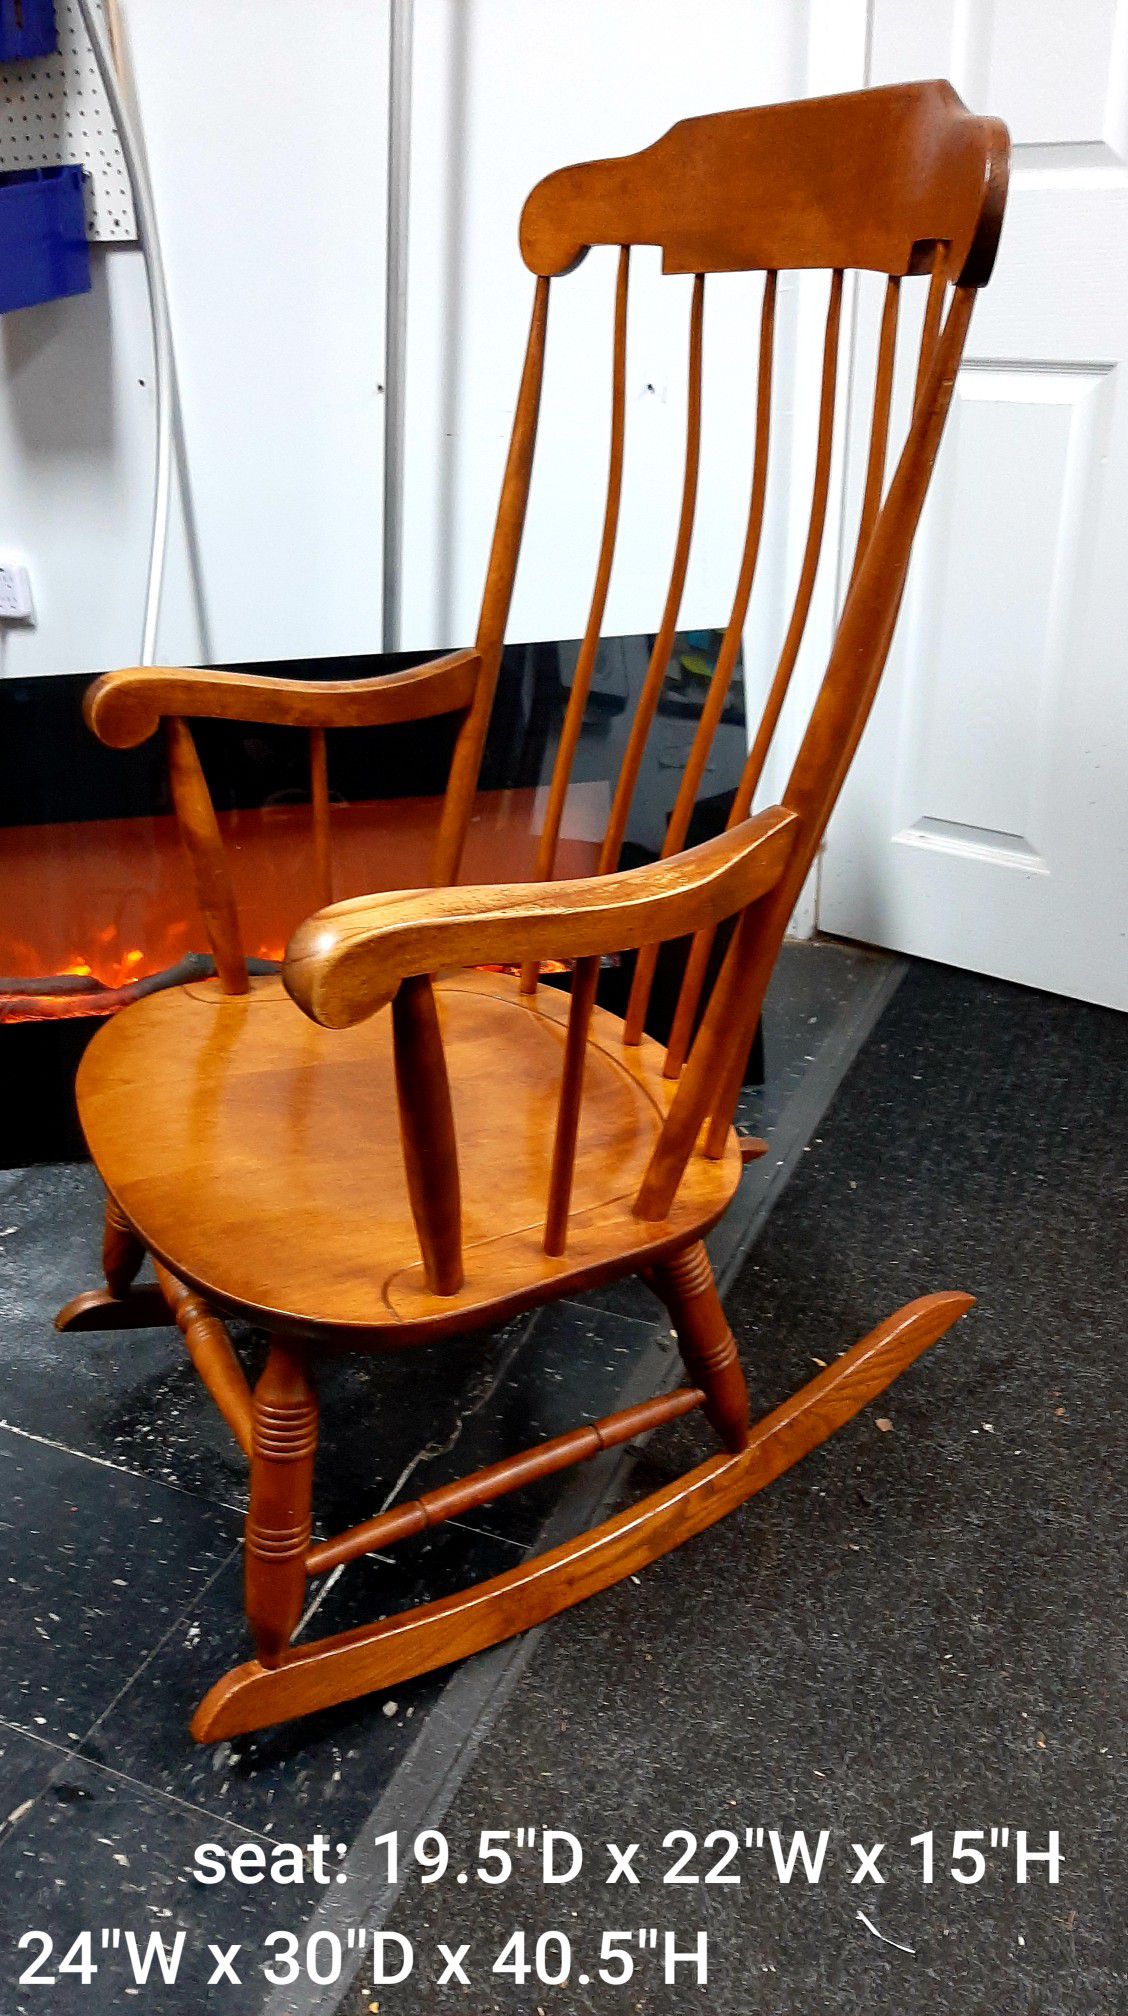 Nichols and Stone Maple Vintage Rocking Chair / Fine Furniture